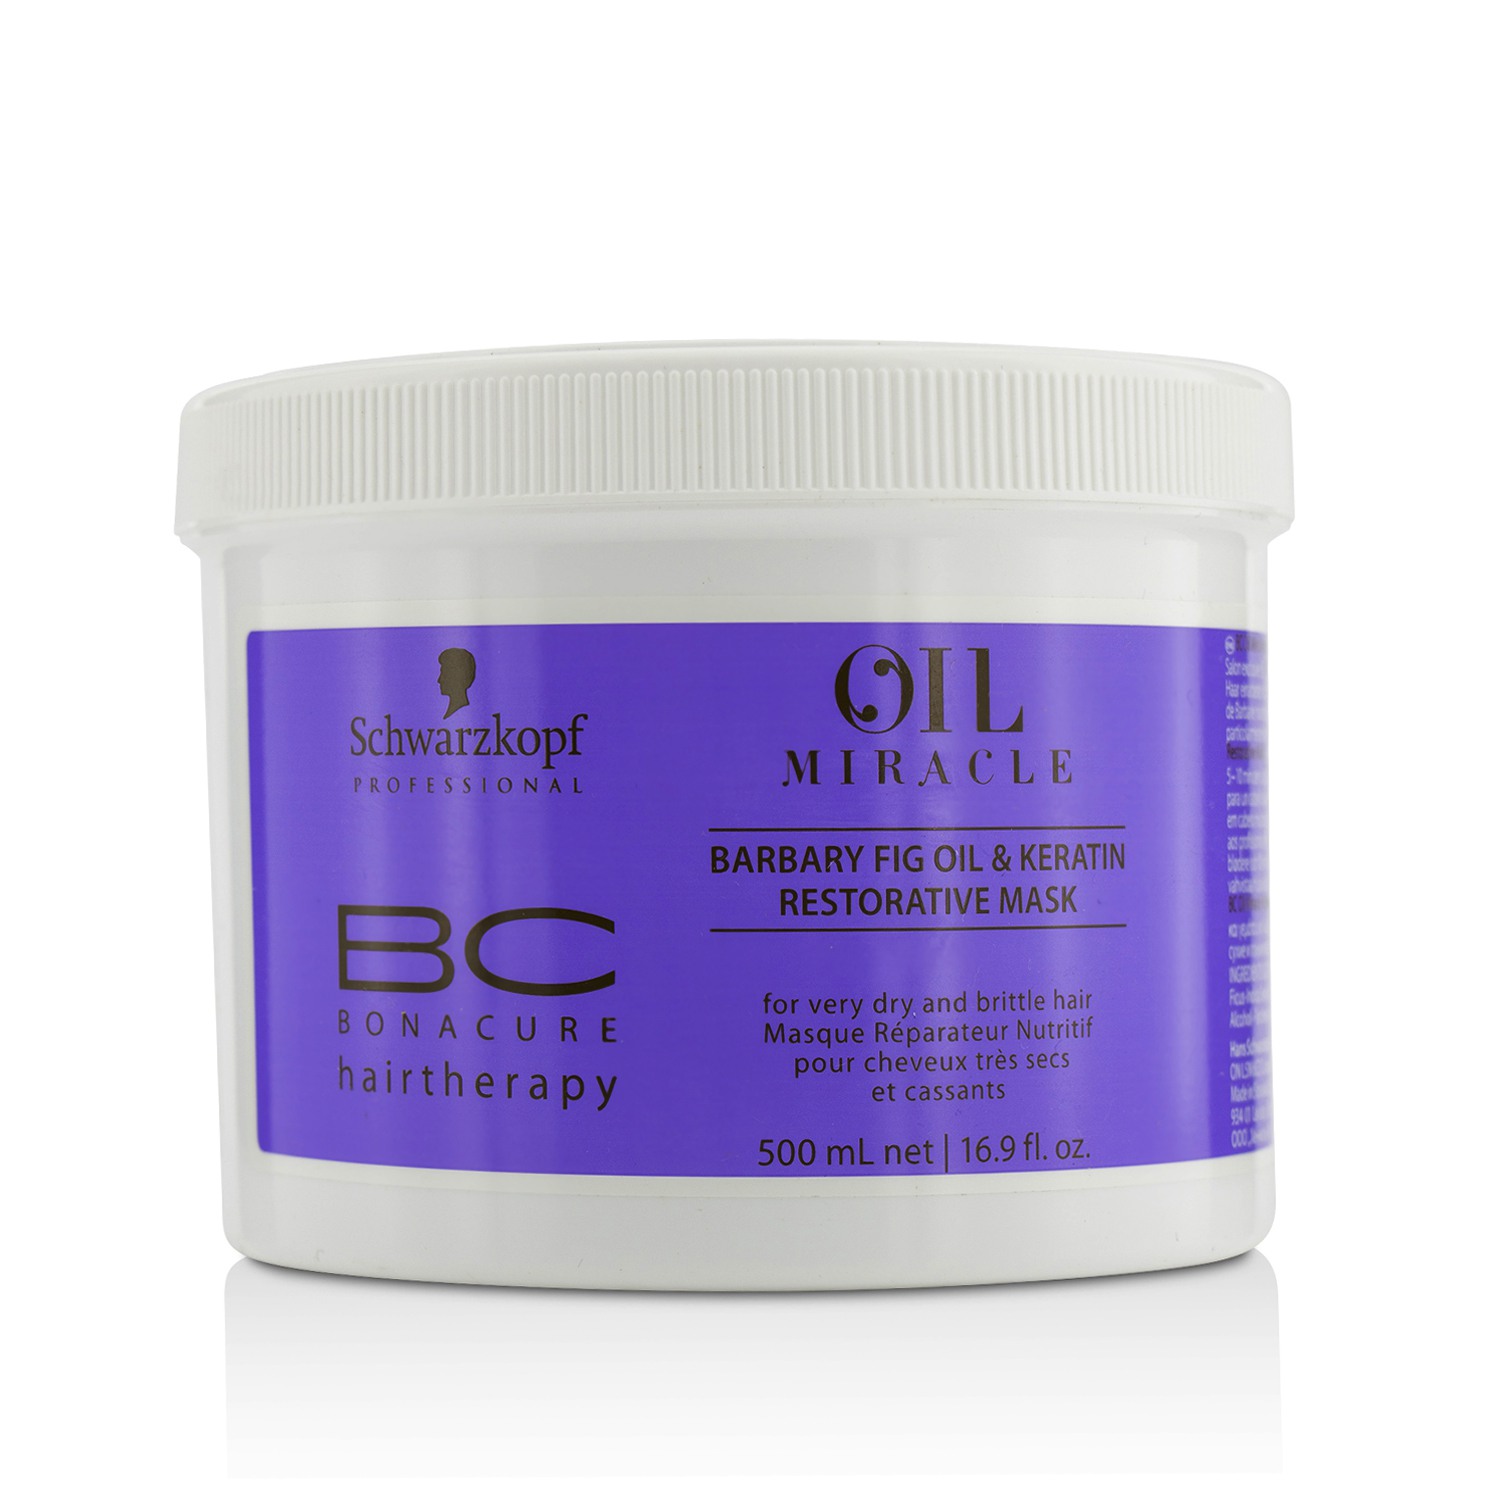 BC Oil Miracle Barbary Fig Oil & Keratin Restorative Mask (For Very Dry and Brittle Hair) Schwarzkopf Image